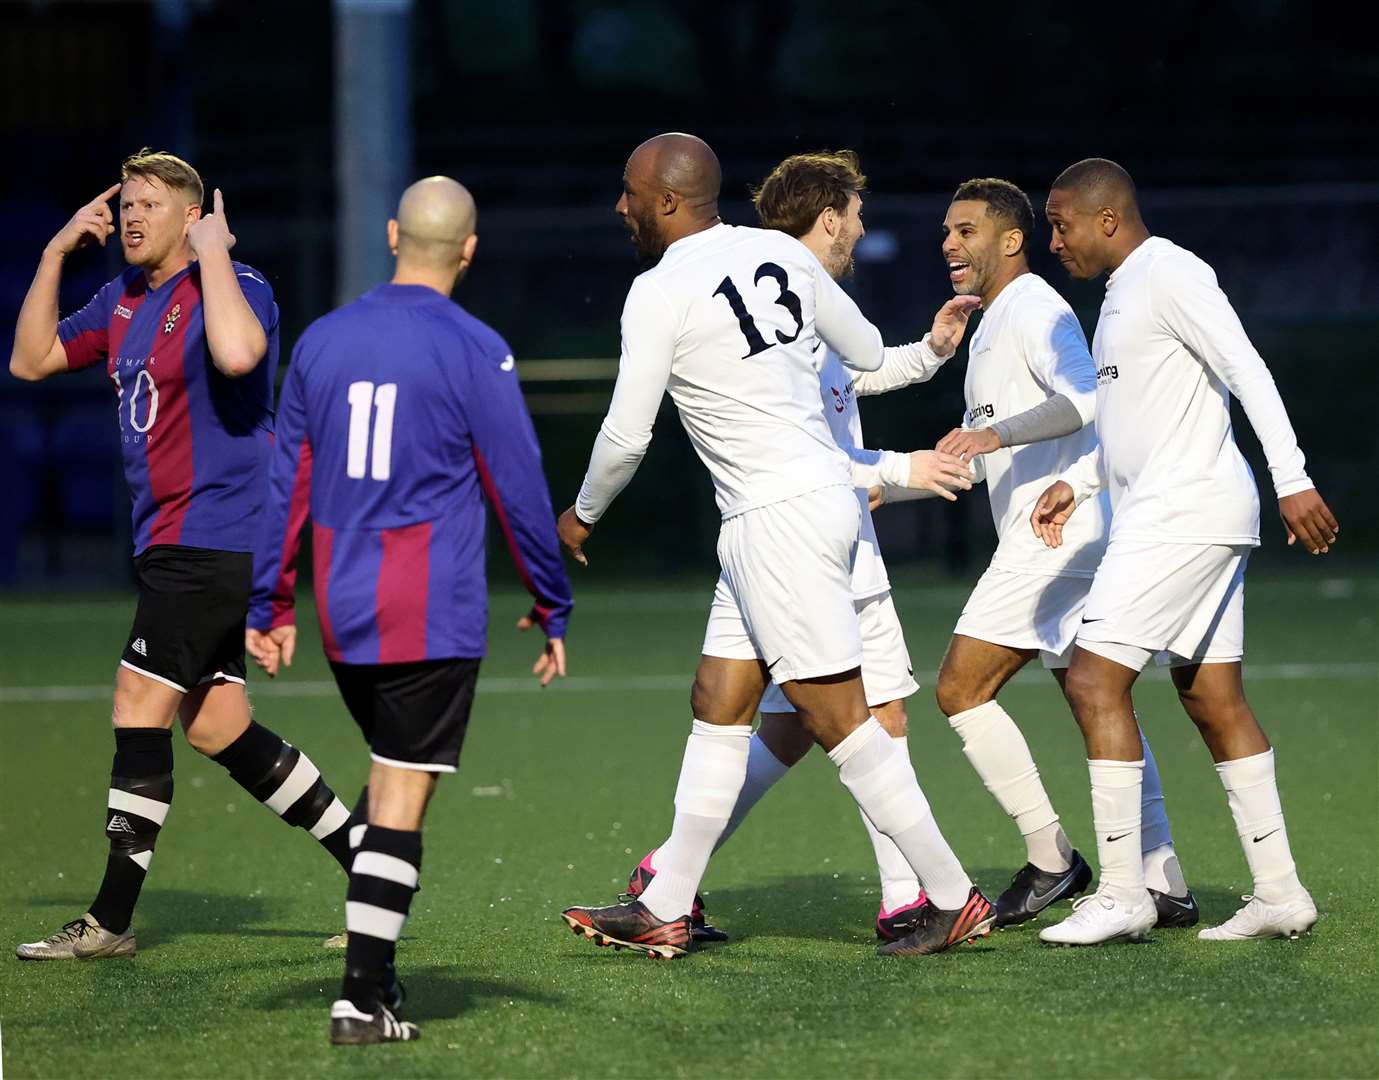 The Charcoal celebrate a goal during their 2-0 DFDS Kent Veterans Cup Final victory over Warlingham. Picture: PSP Images